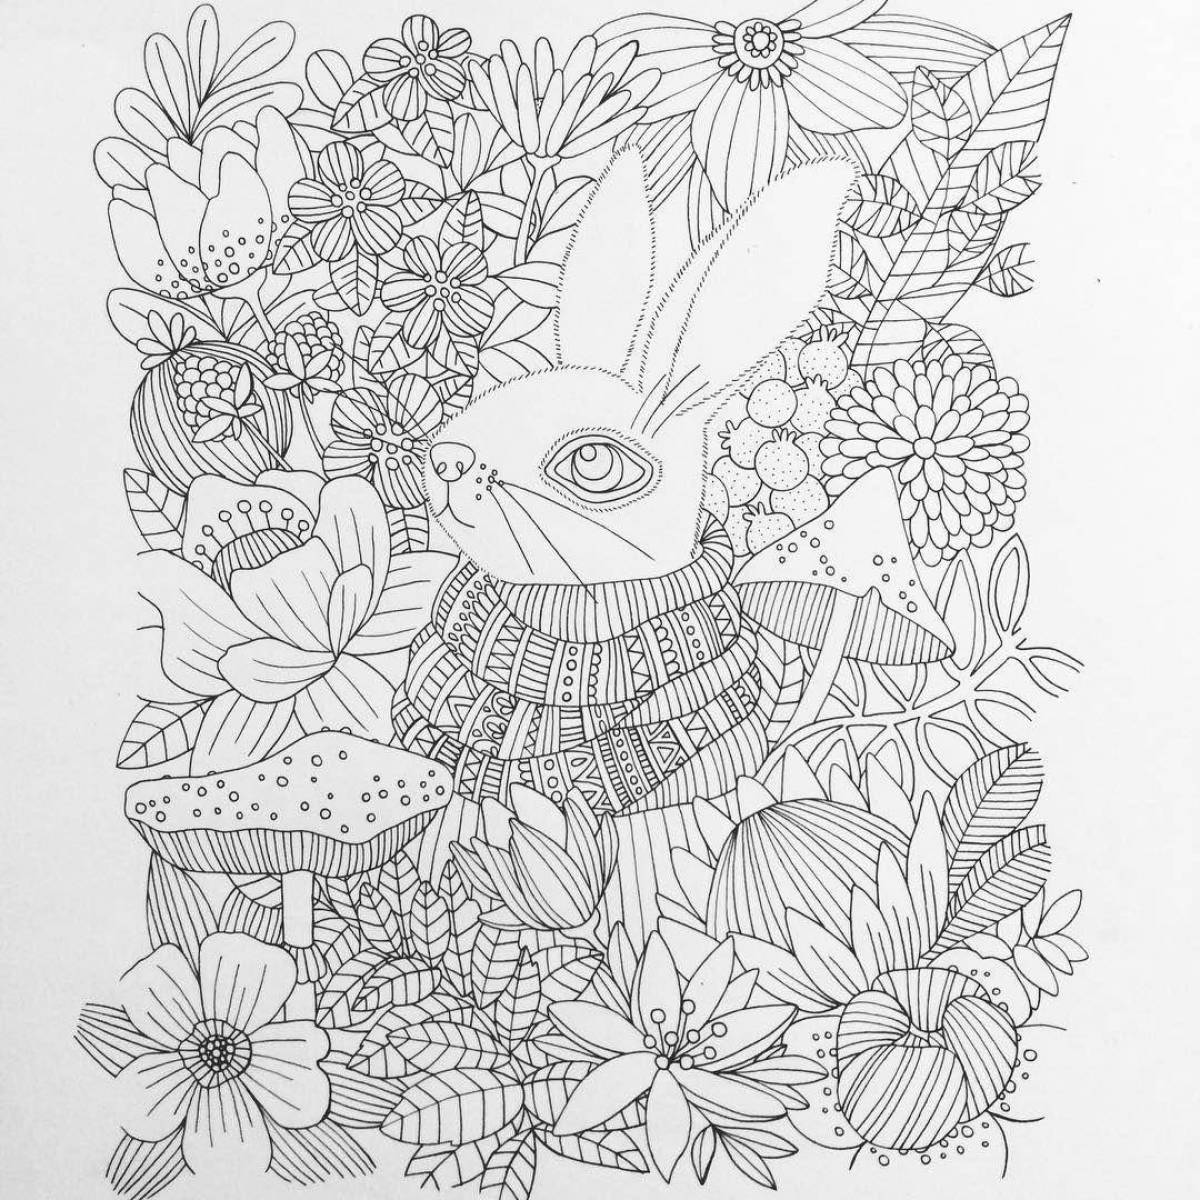 Great anti-stress bunny coloring book